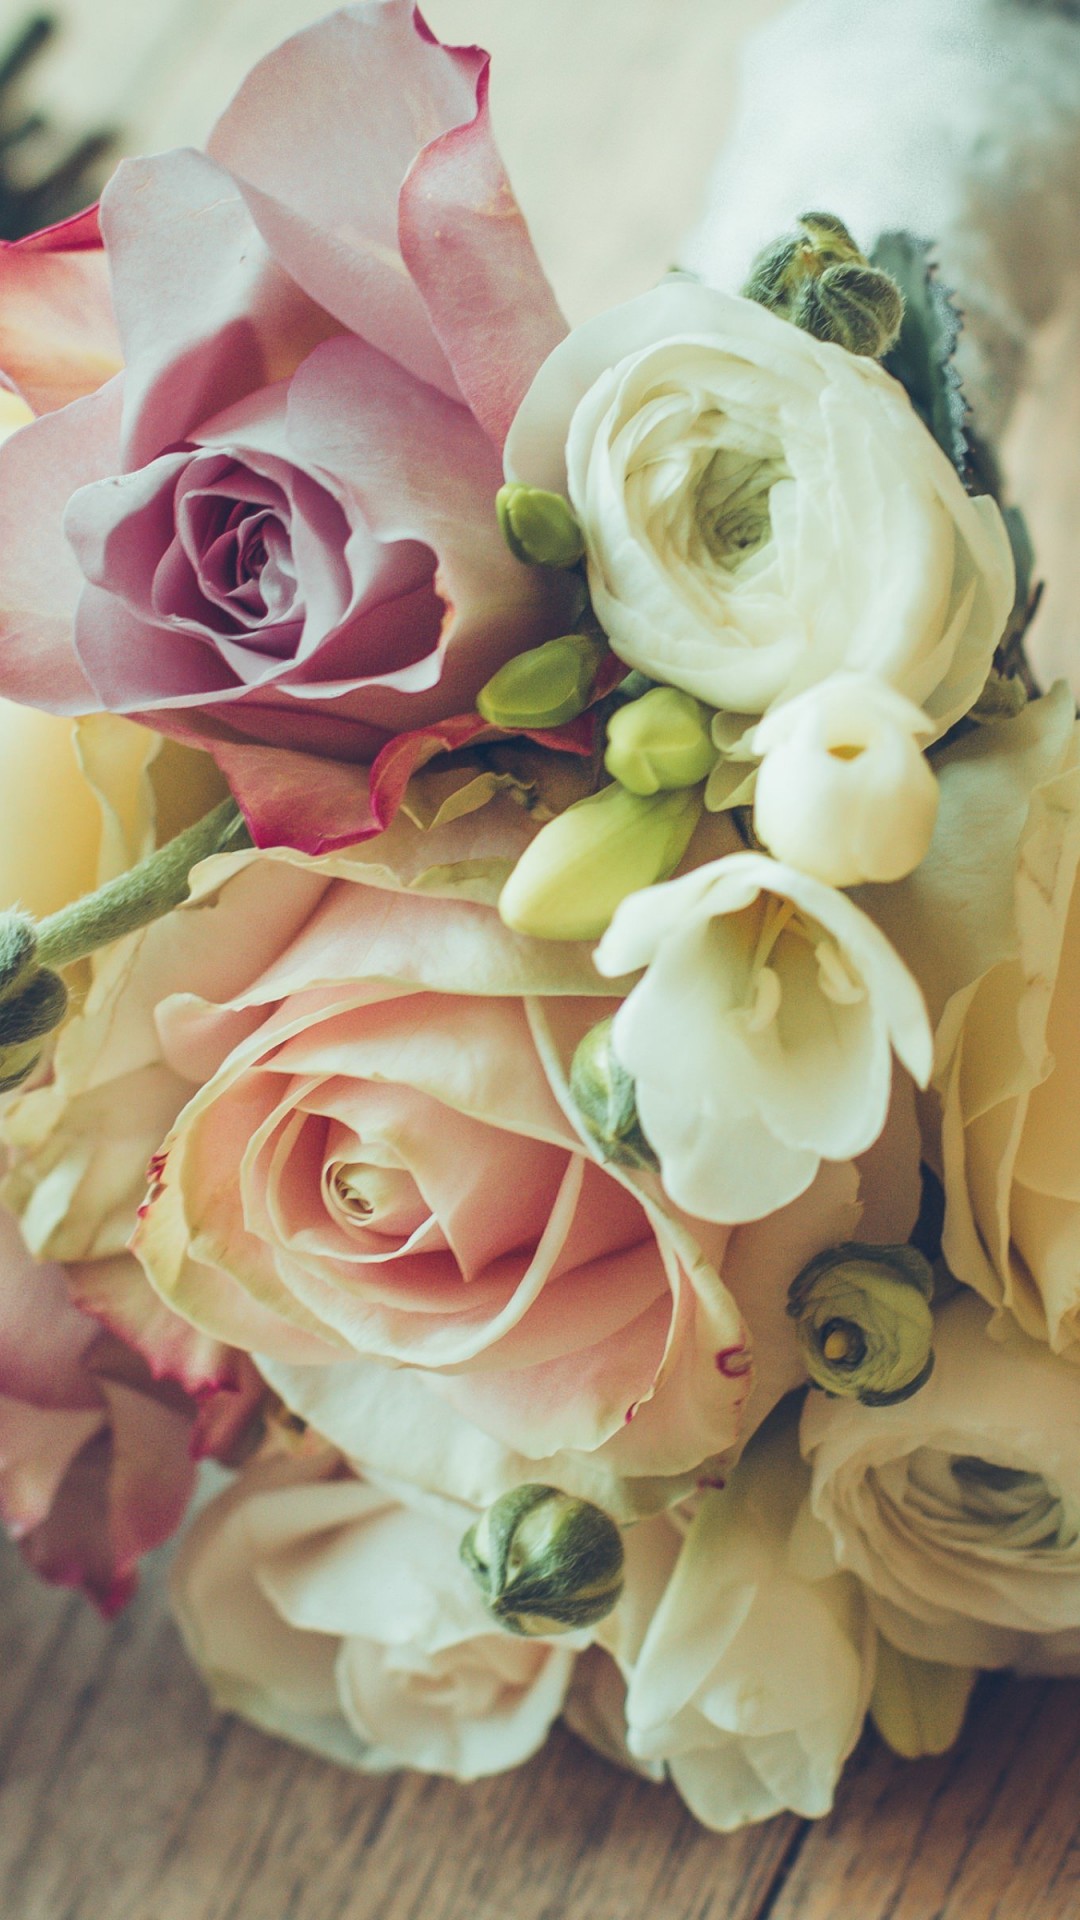 Roses Bouquet Composition Wallpaper for SAMSUNG Galaxy S4